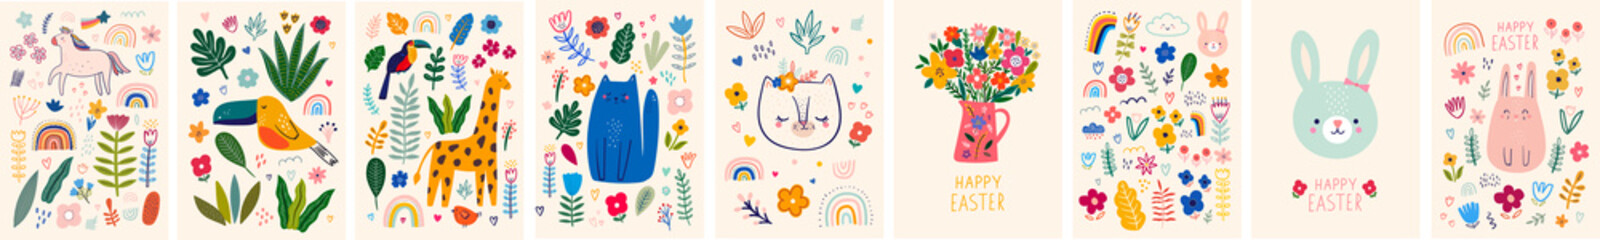 Baby posters and cards with animals and flowers pattern. Vector illustrations with cute animals. Nursery baby illustrations. - 498617794